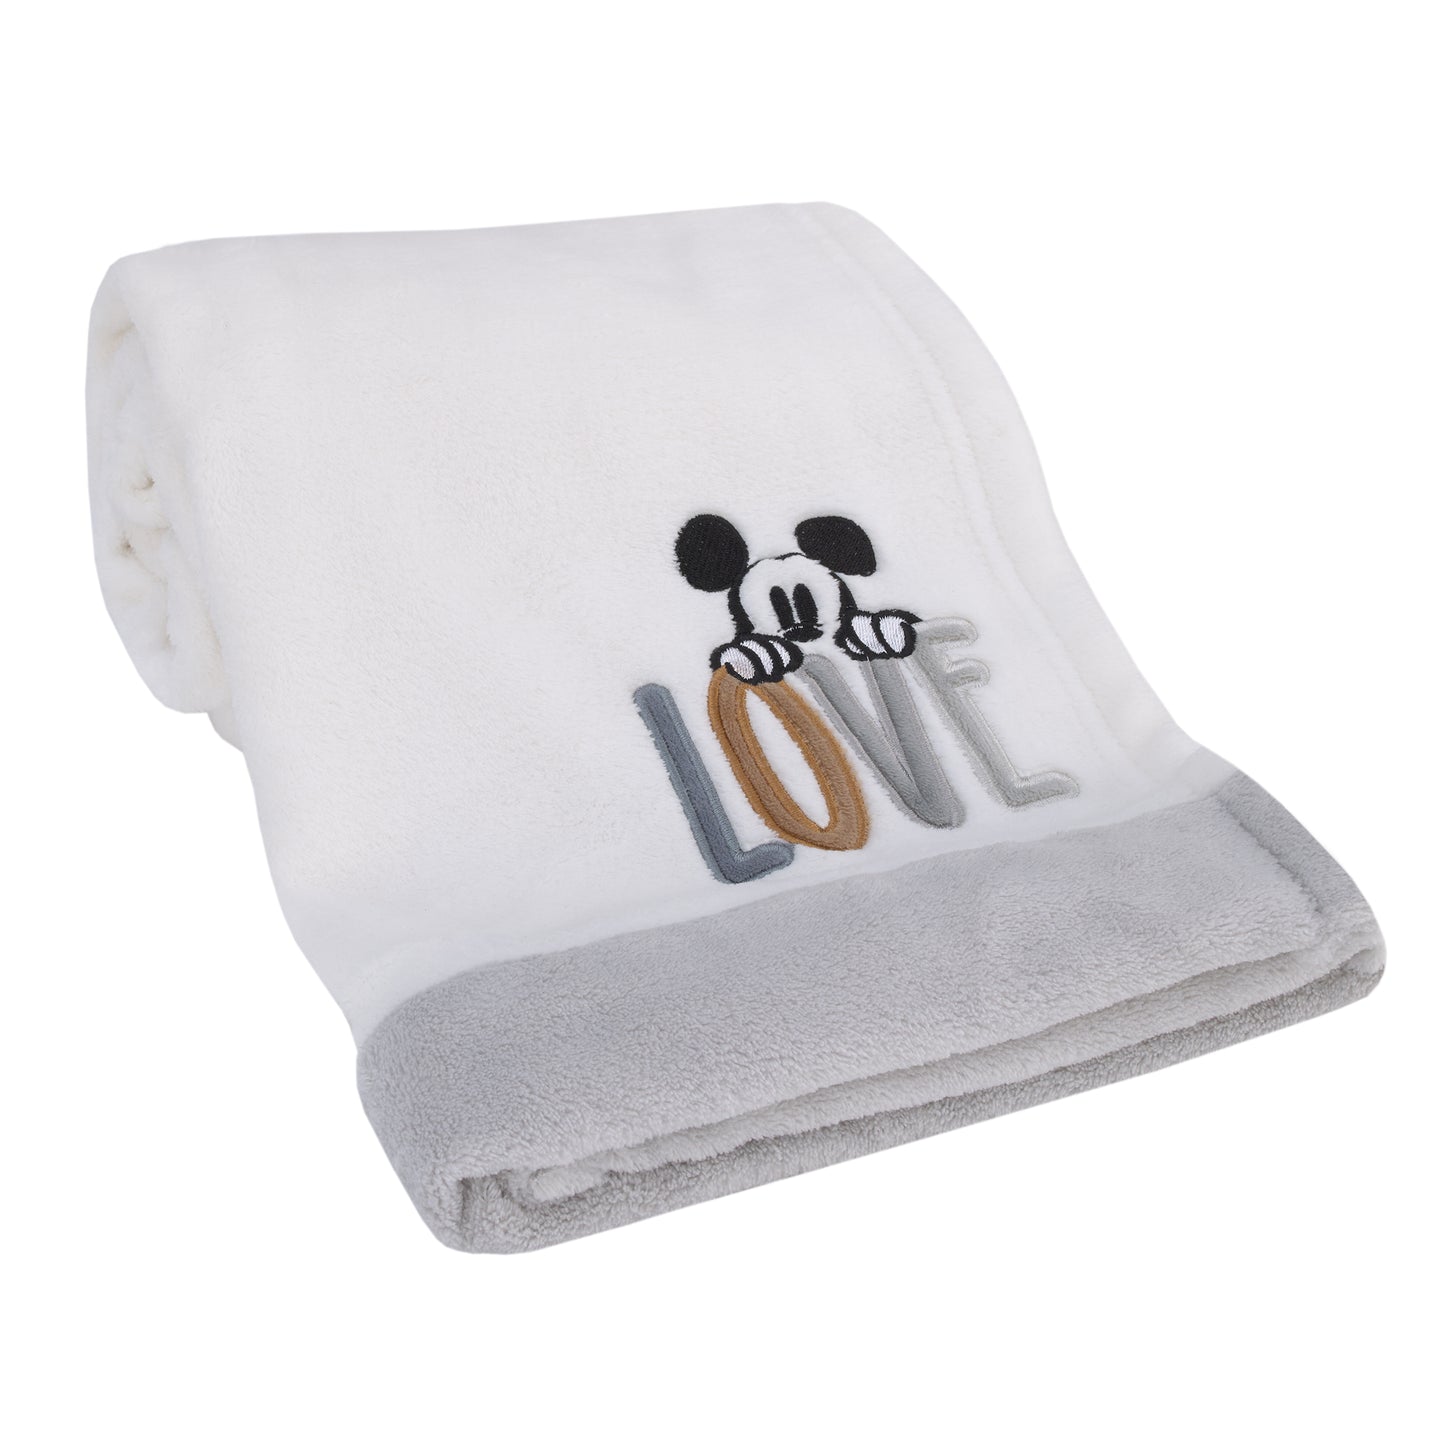 Disney Mickey Mouse Love Mickey White, Gray, and Tan Love Applique Super Soft Baby Blanket